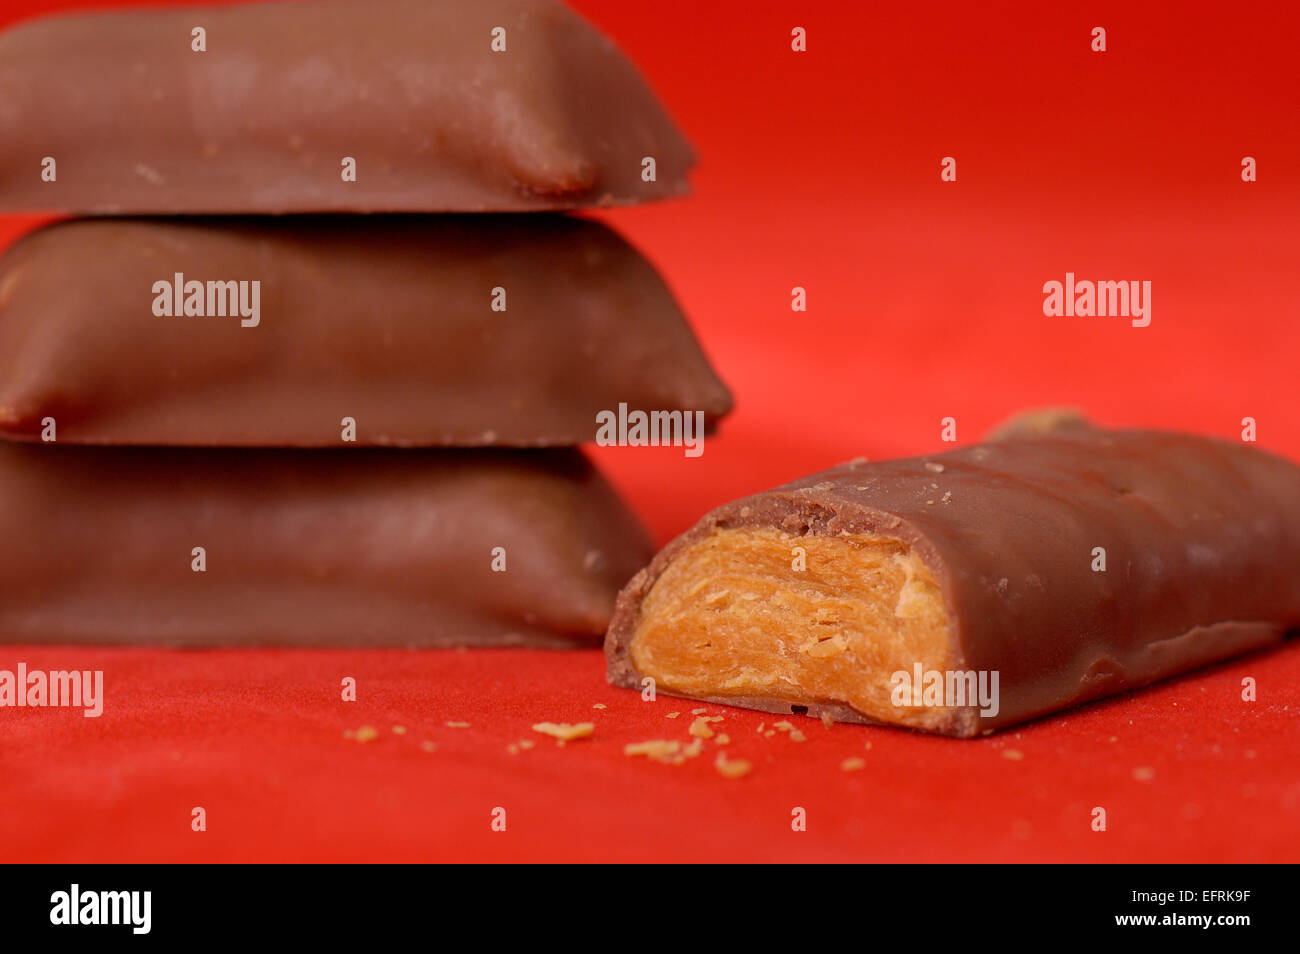 Unwrapped pieces of fun size Butterfinger candy. Stock Photo